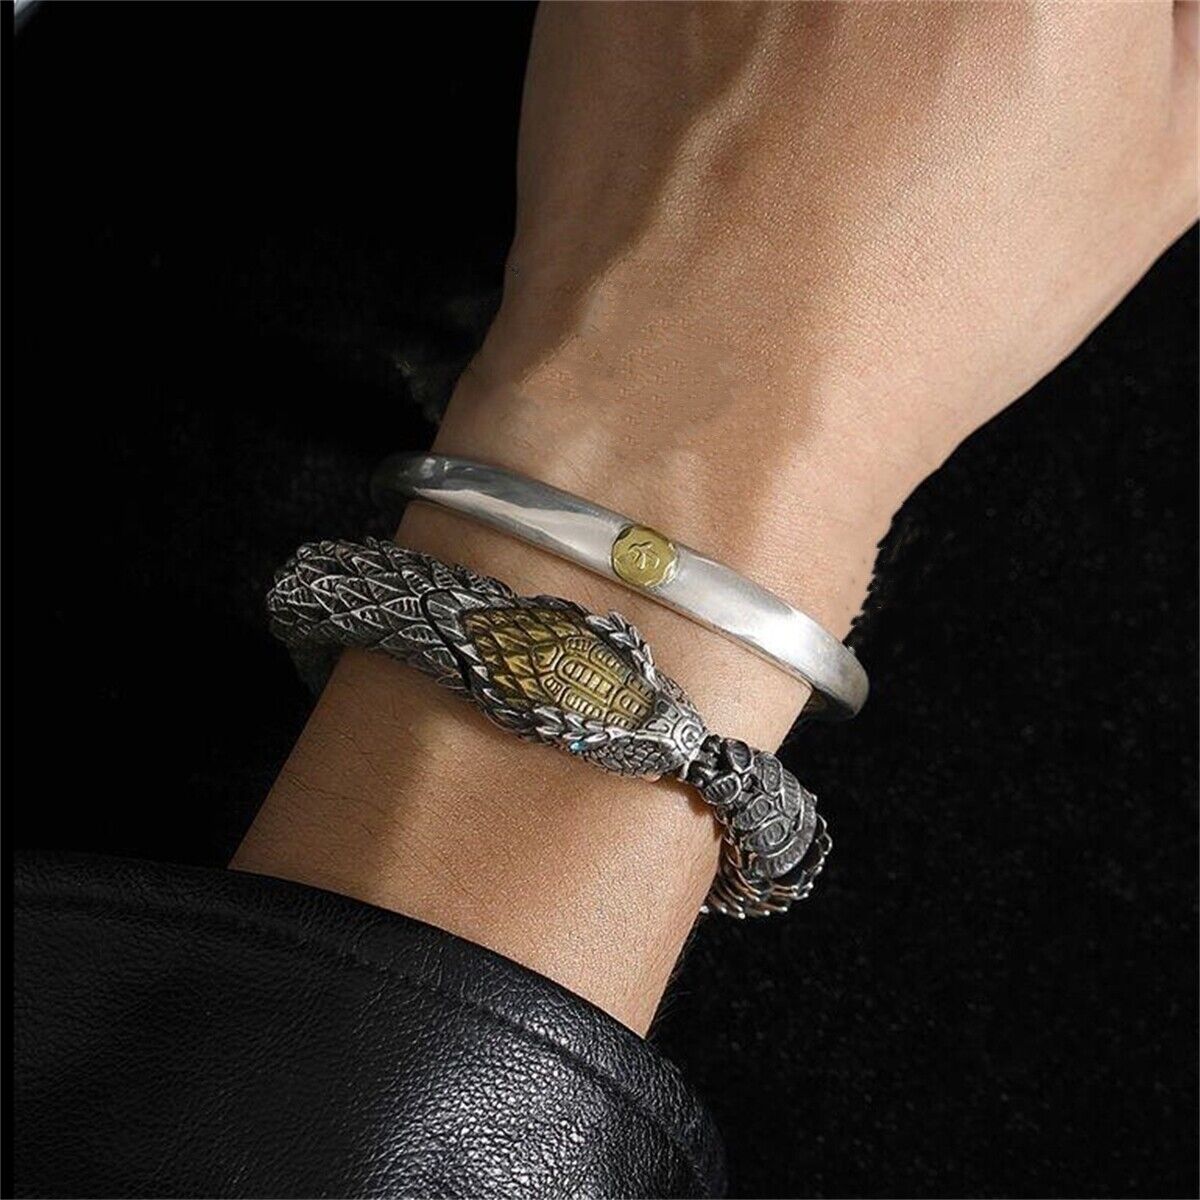 RARE PRINCE by CARAT SUTRA | Unique Golden Head Oxidized Snake Bracelet with Blue Eyes | 925 Sterling Silver Oxidized Bracelet | Unisex Jewelry | With Certificate of Authenticity and 925 Hallmark